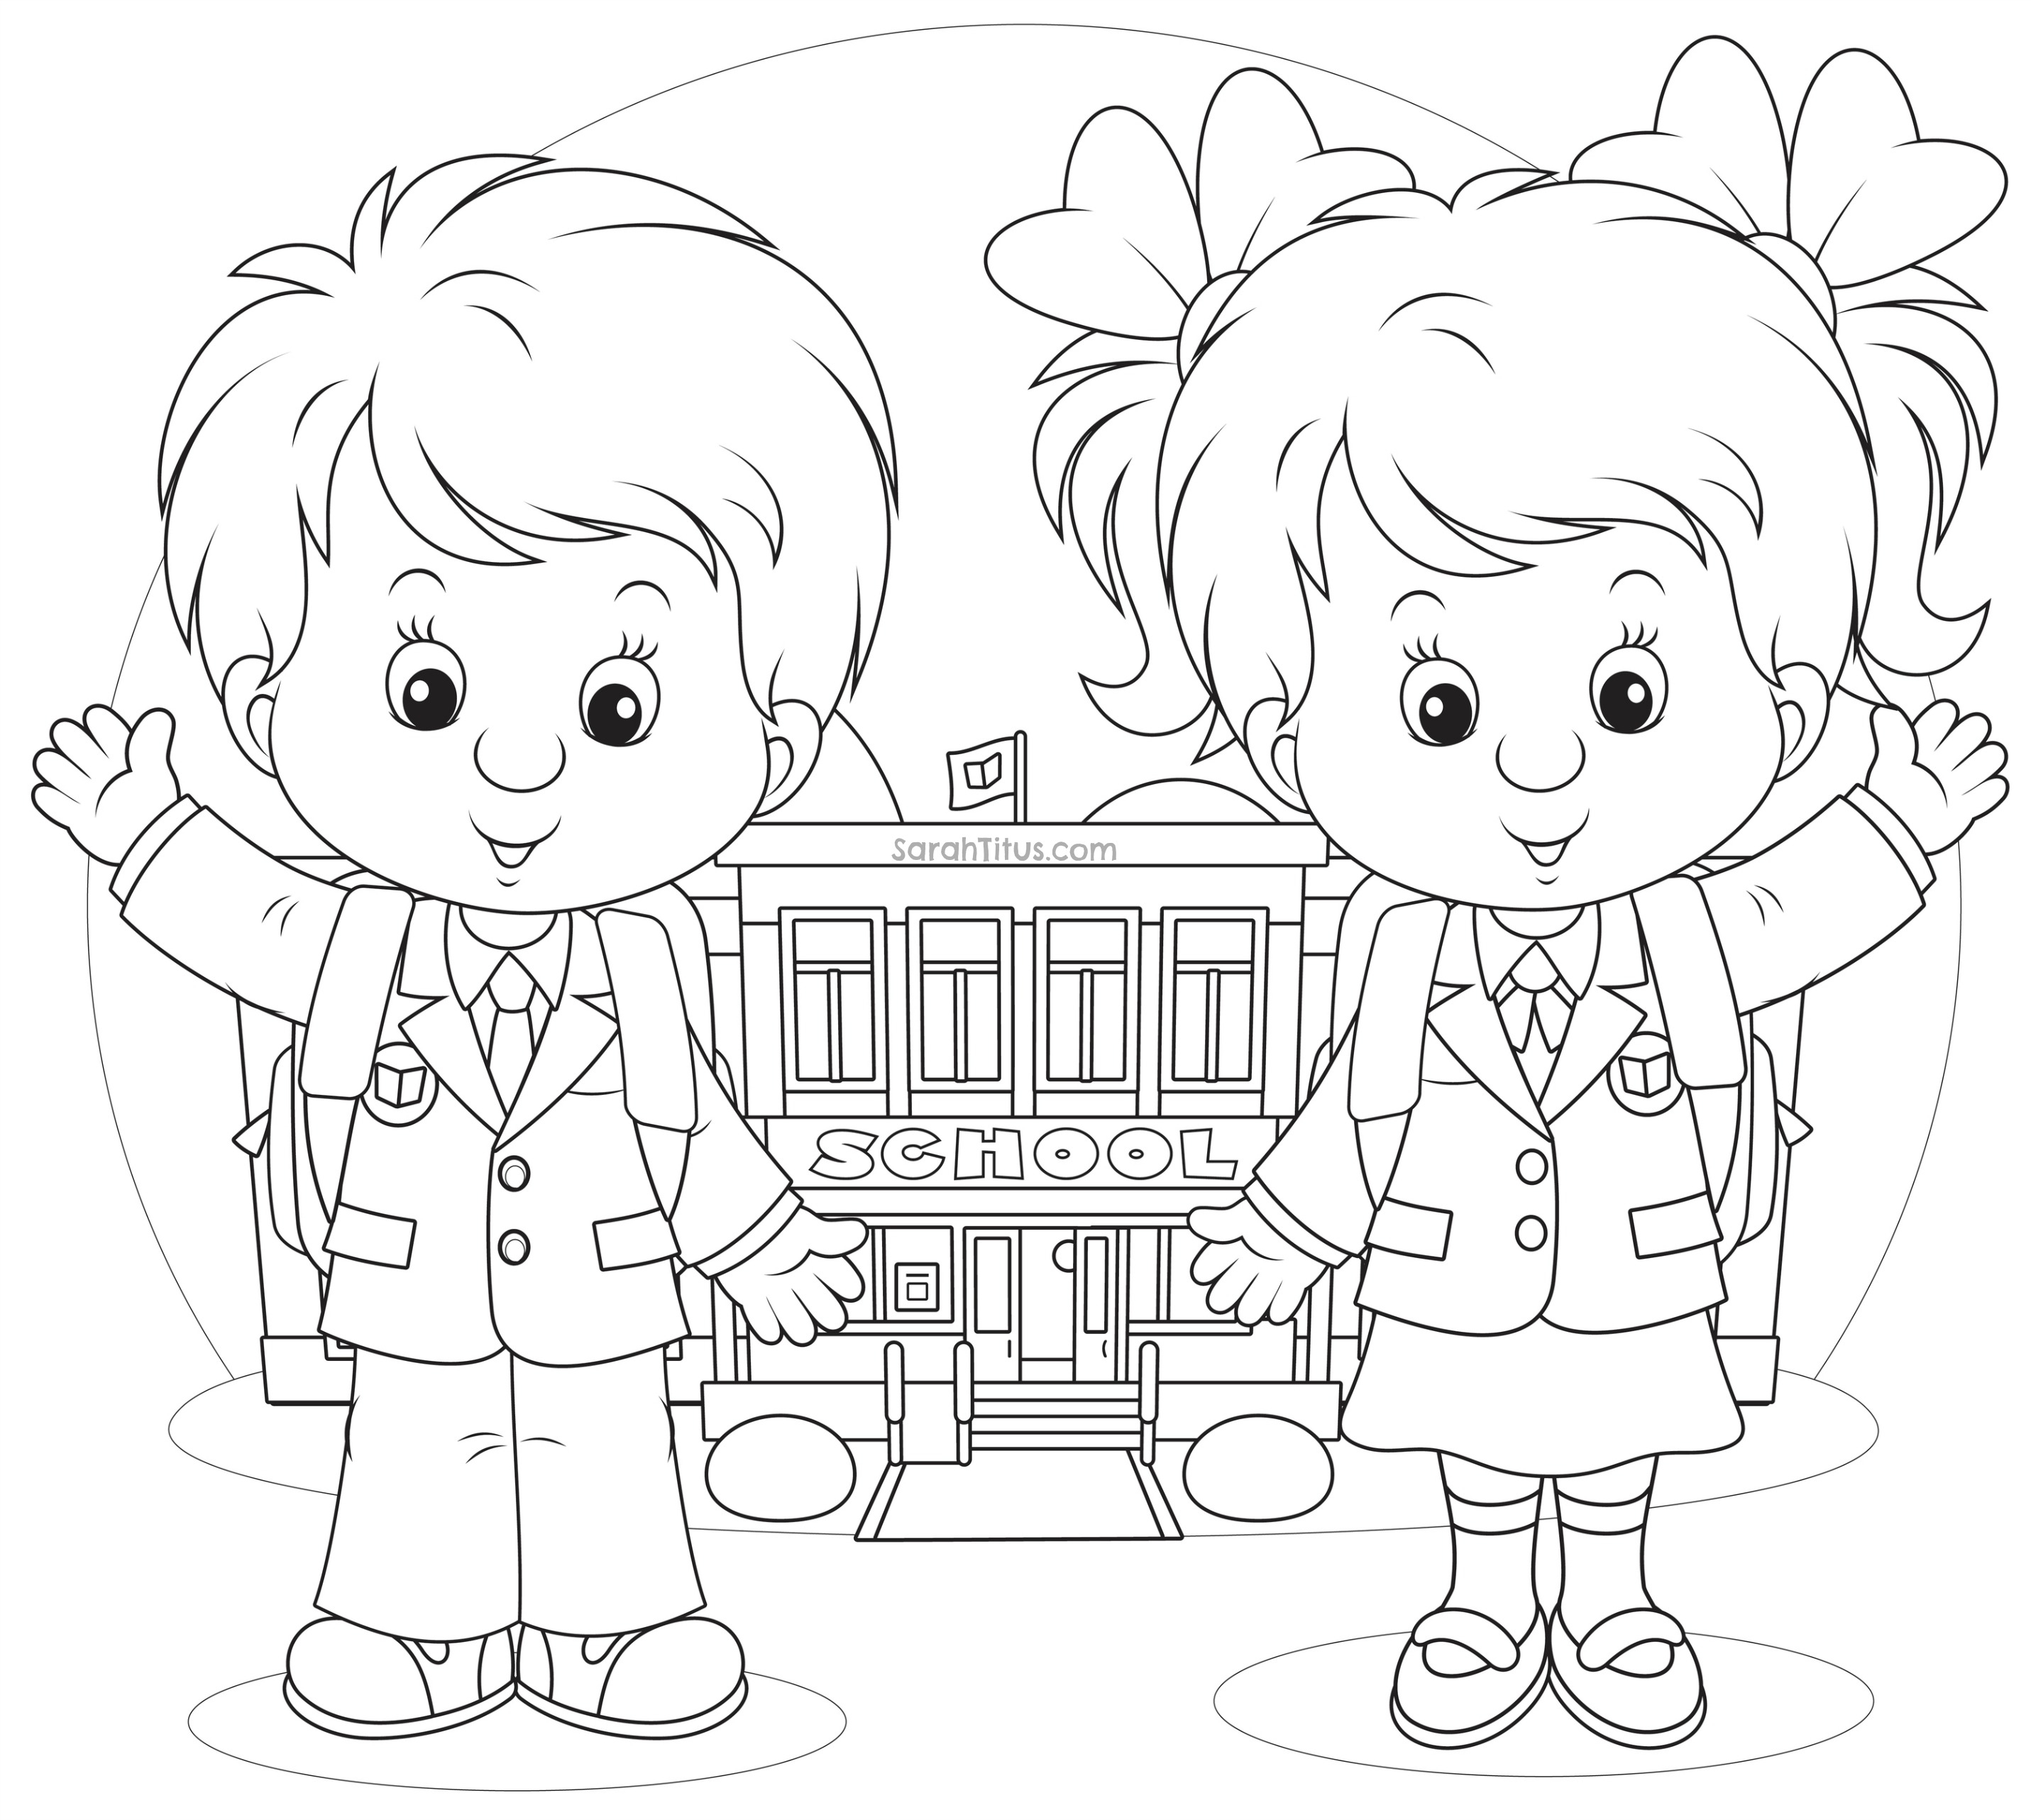 Police Helicopter Coloring Pages at GetColorings.com | Free printable